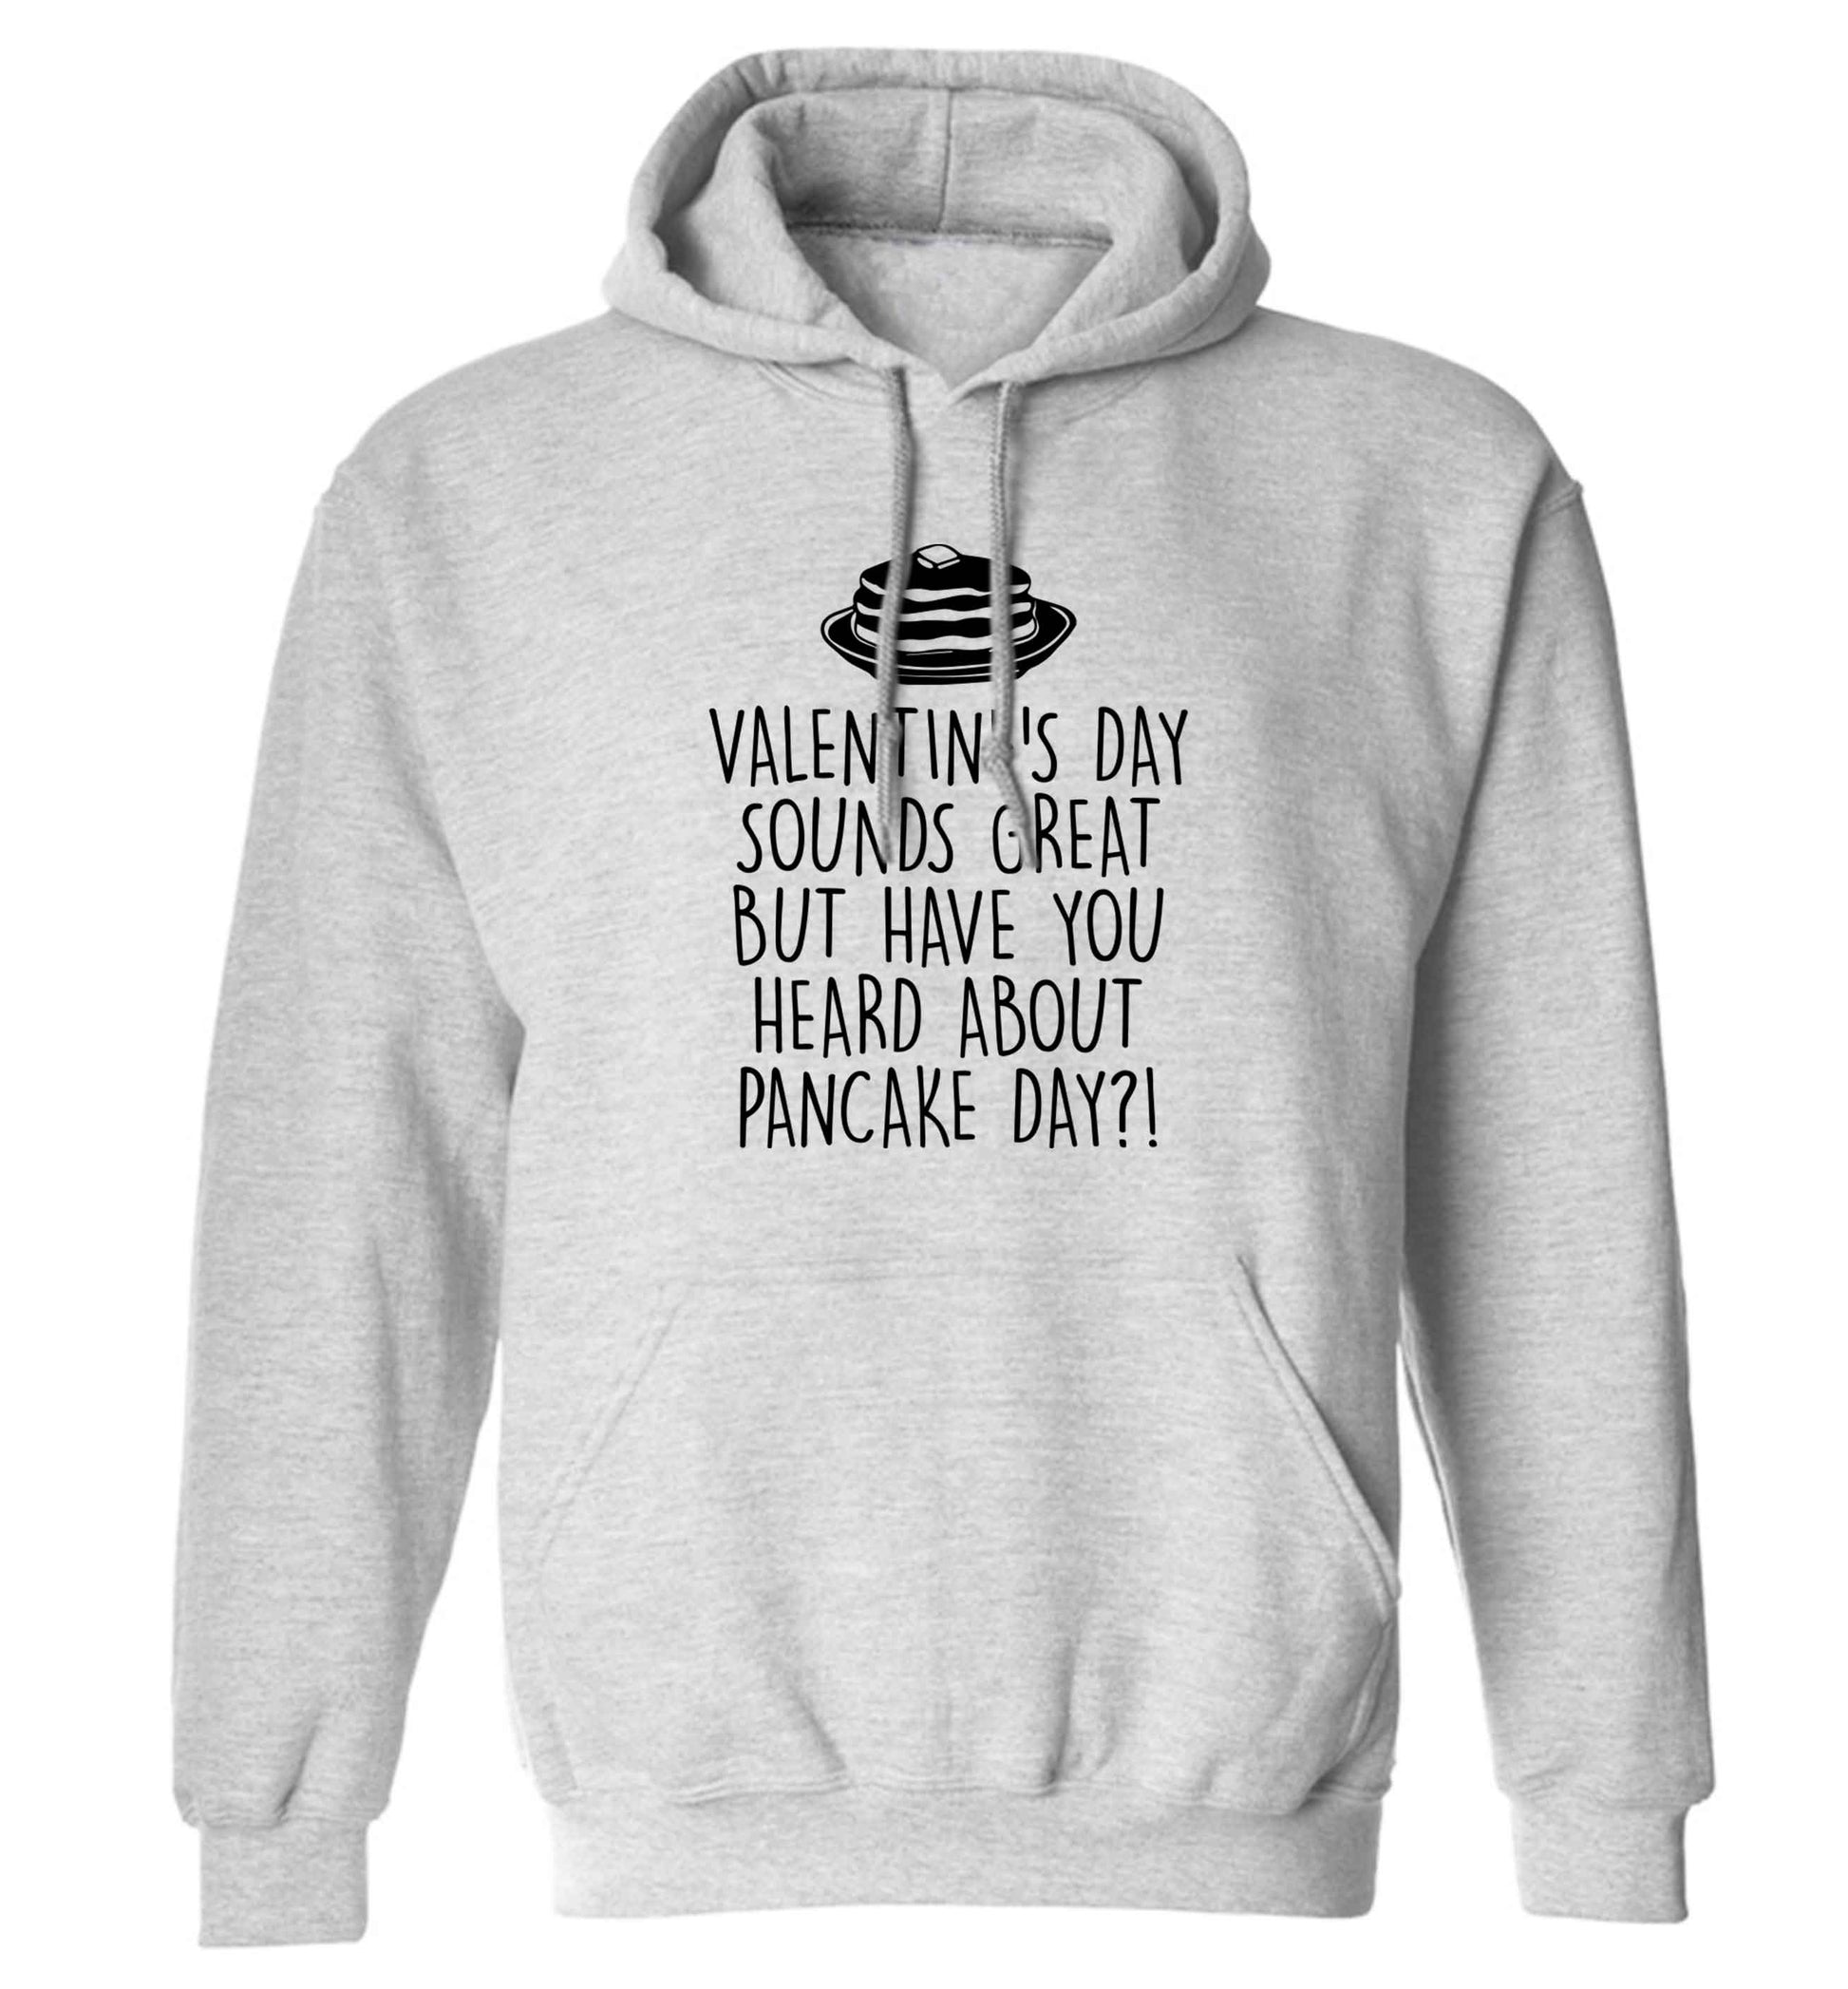 Valentine's day sounds great but have you heard about pancake day?! adults unisex grey hoodie 2XL